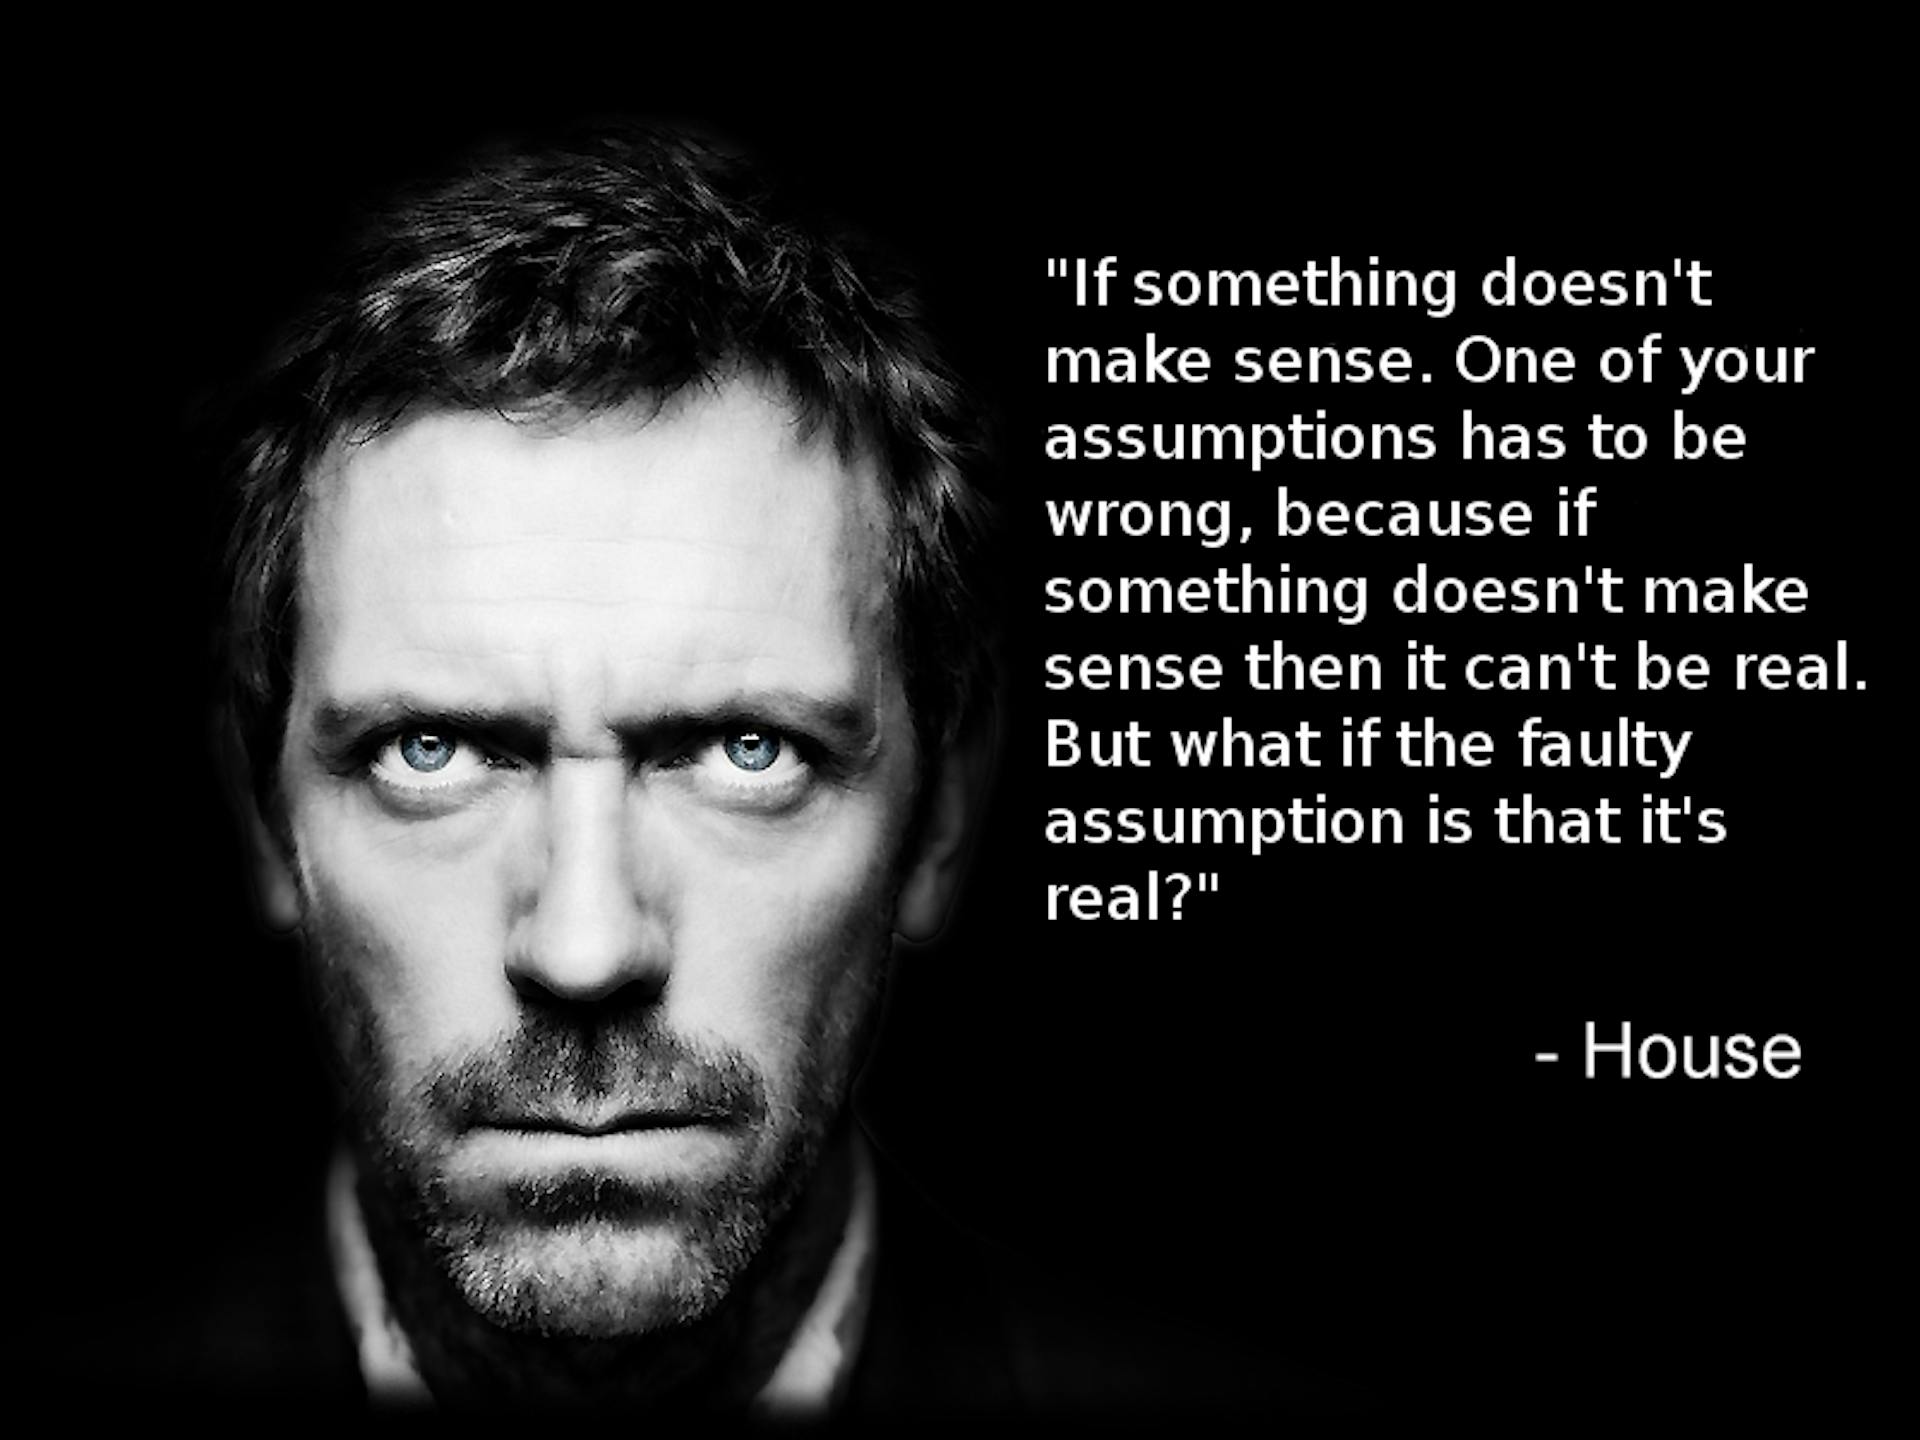 If something doesn't make sense. One of your assumptions has to wrong, because if something doesn't make sense then it can't be real. But what if the faulty assumption is that it's real. - House